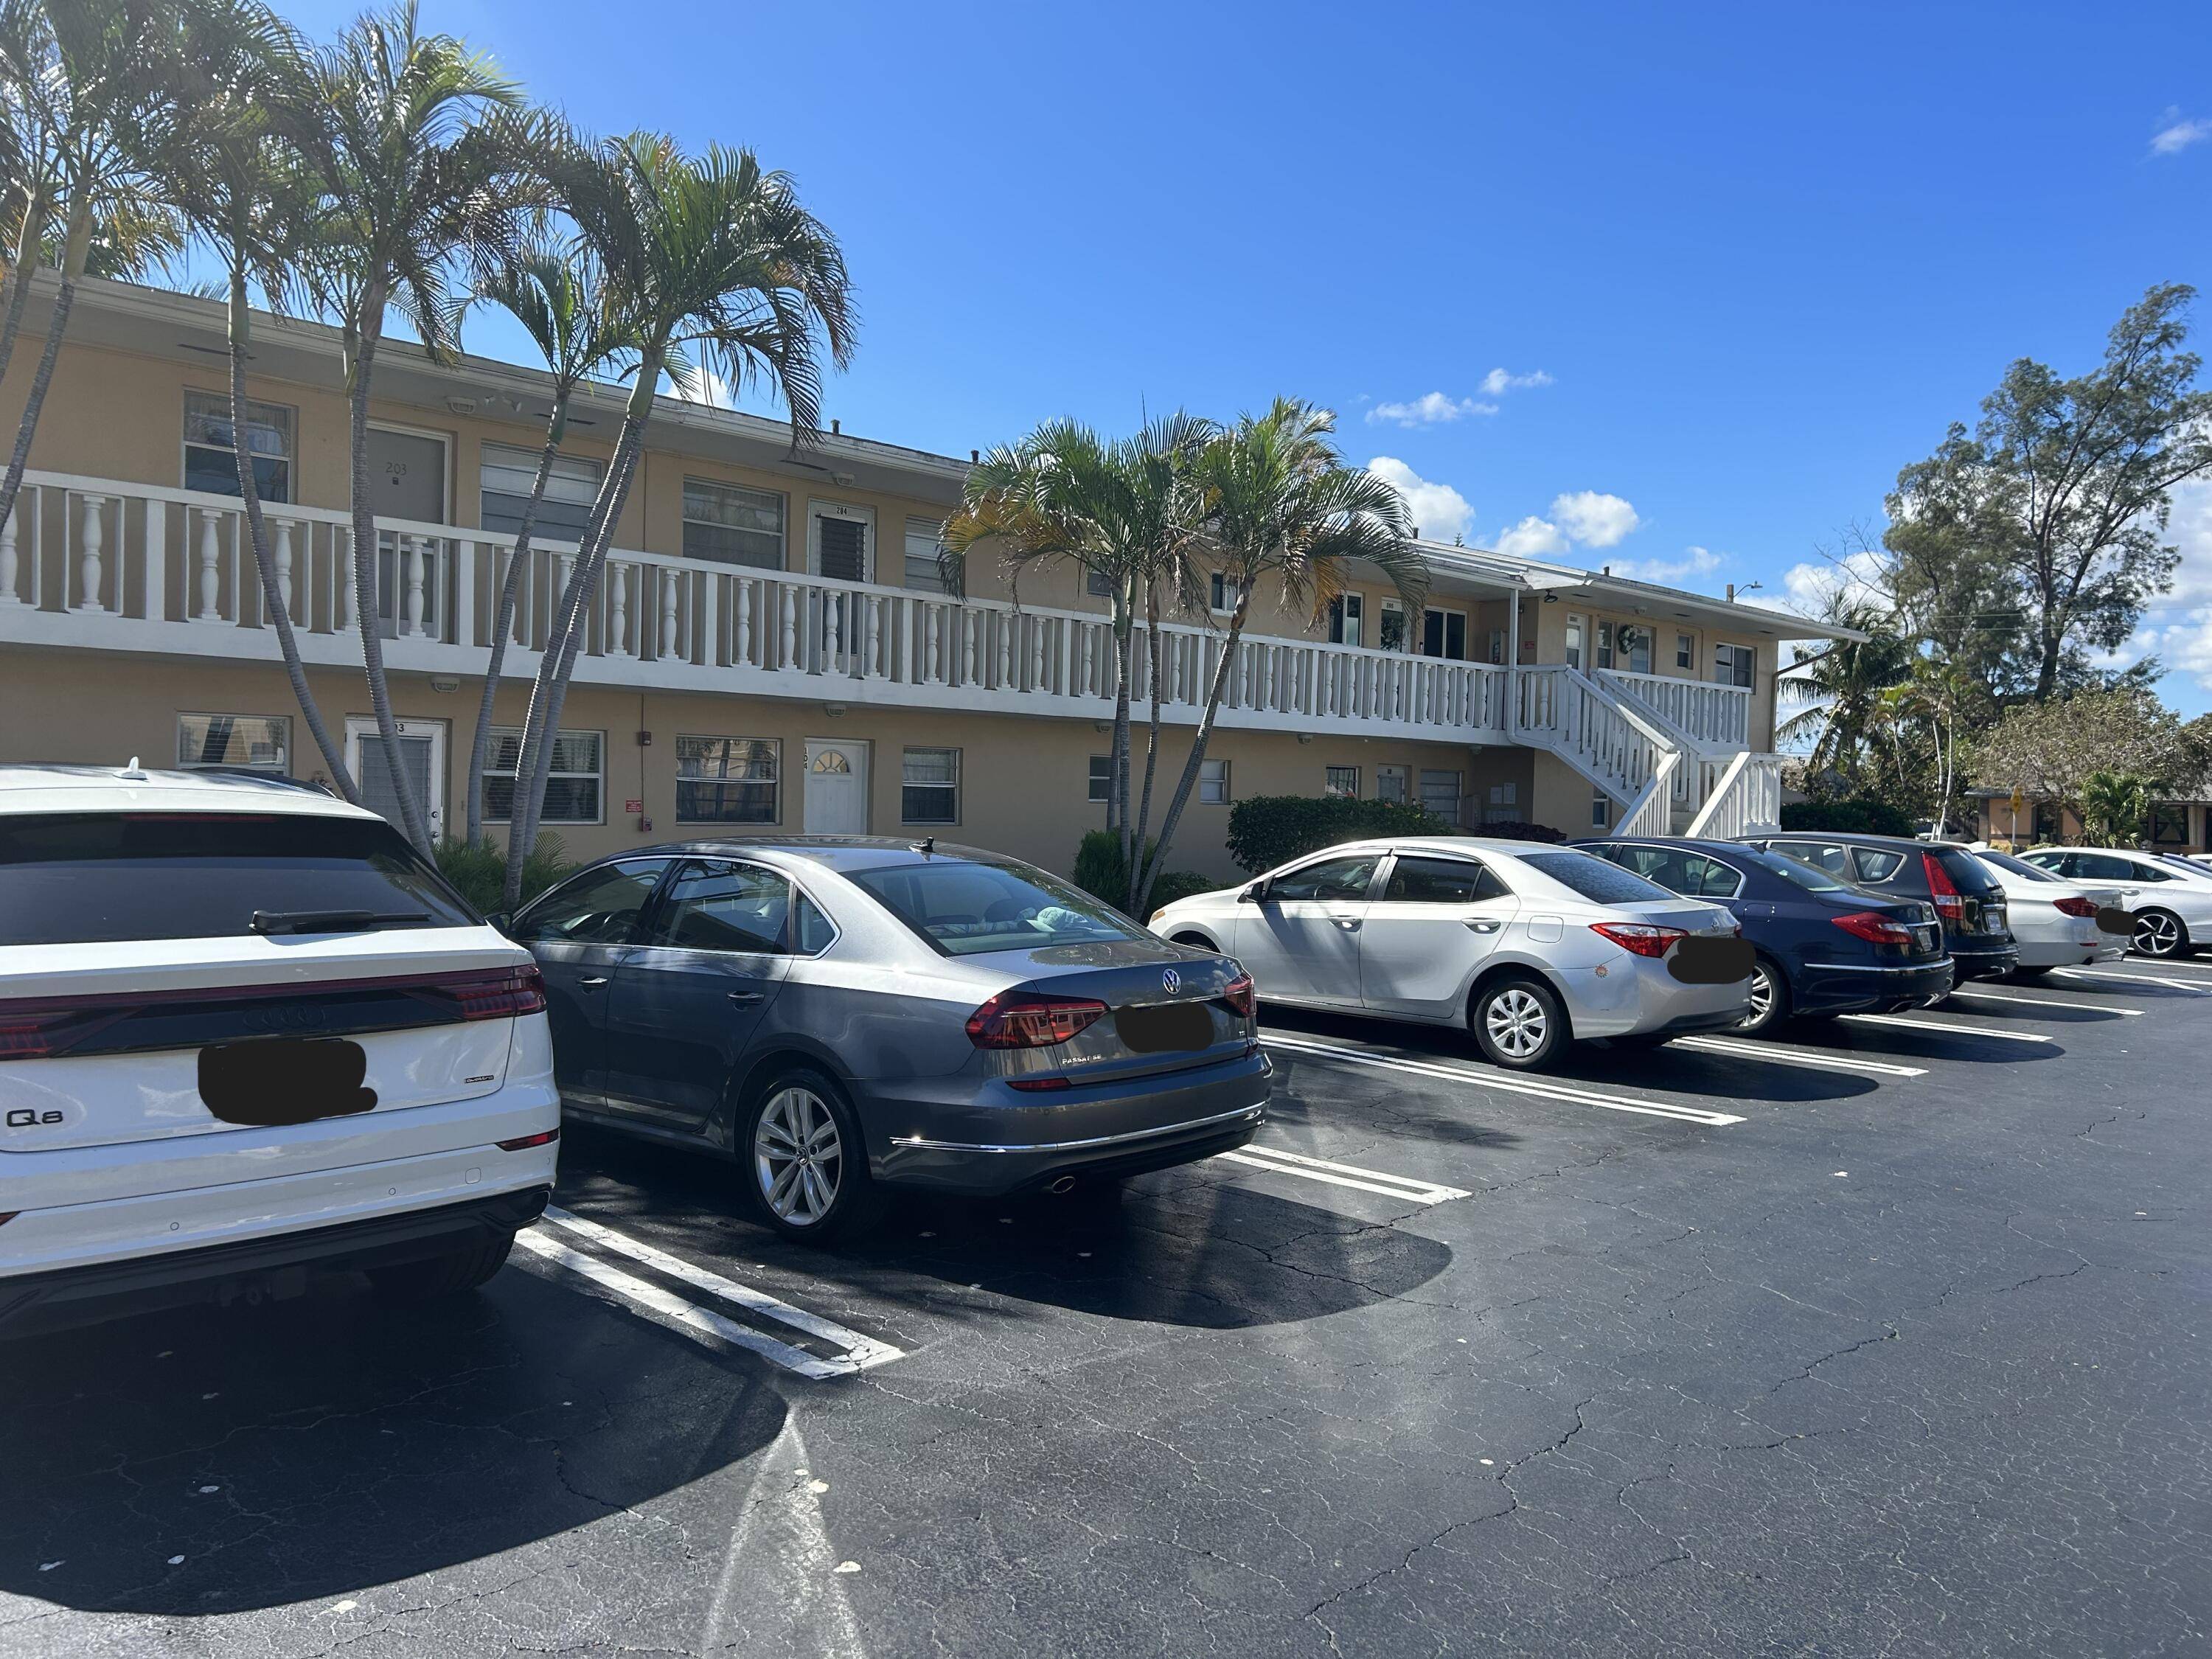 Indulge in the perfect blend of comfort and sunshine with this well maintained, award winning one bedroom condo nestled in the heart of sunny South Florida.